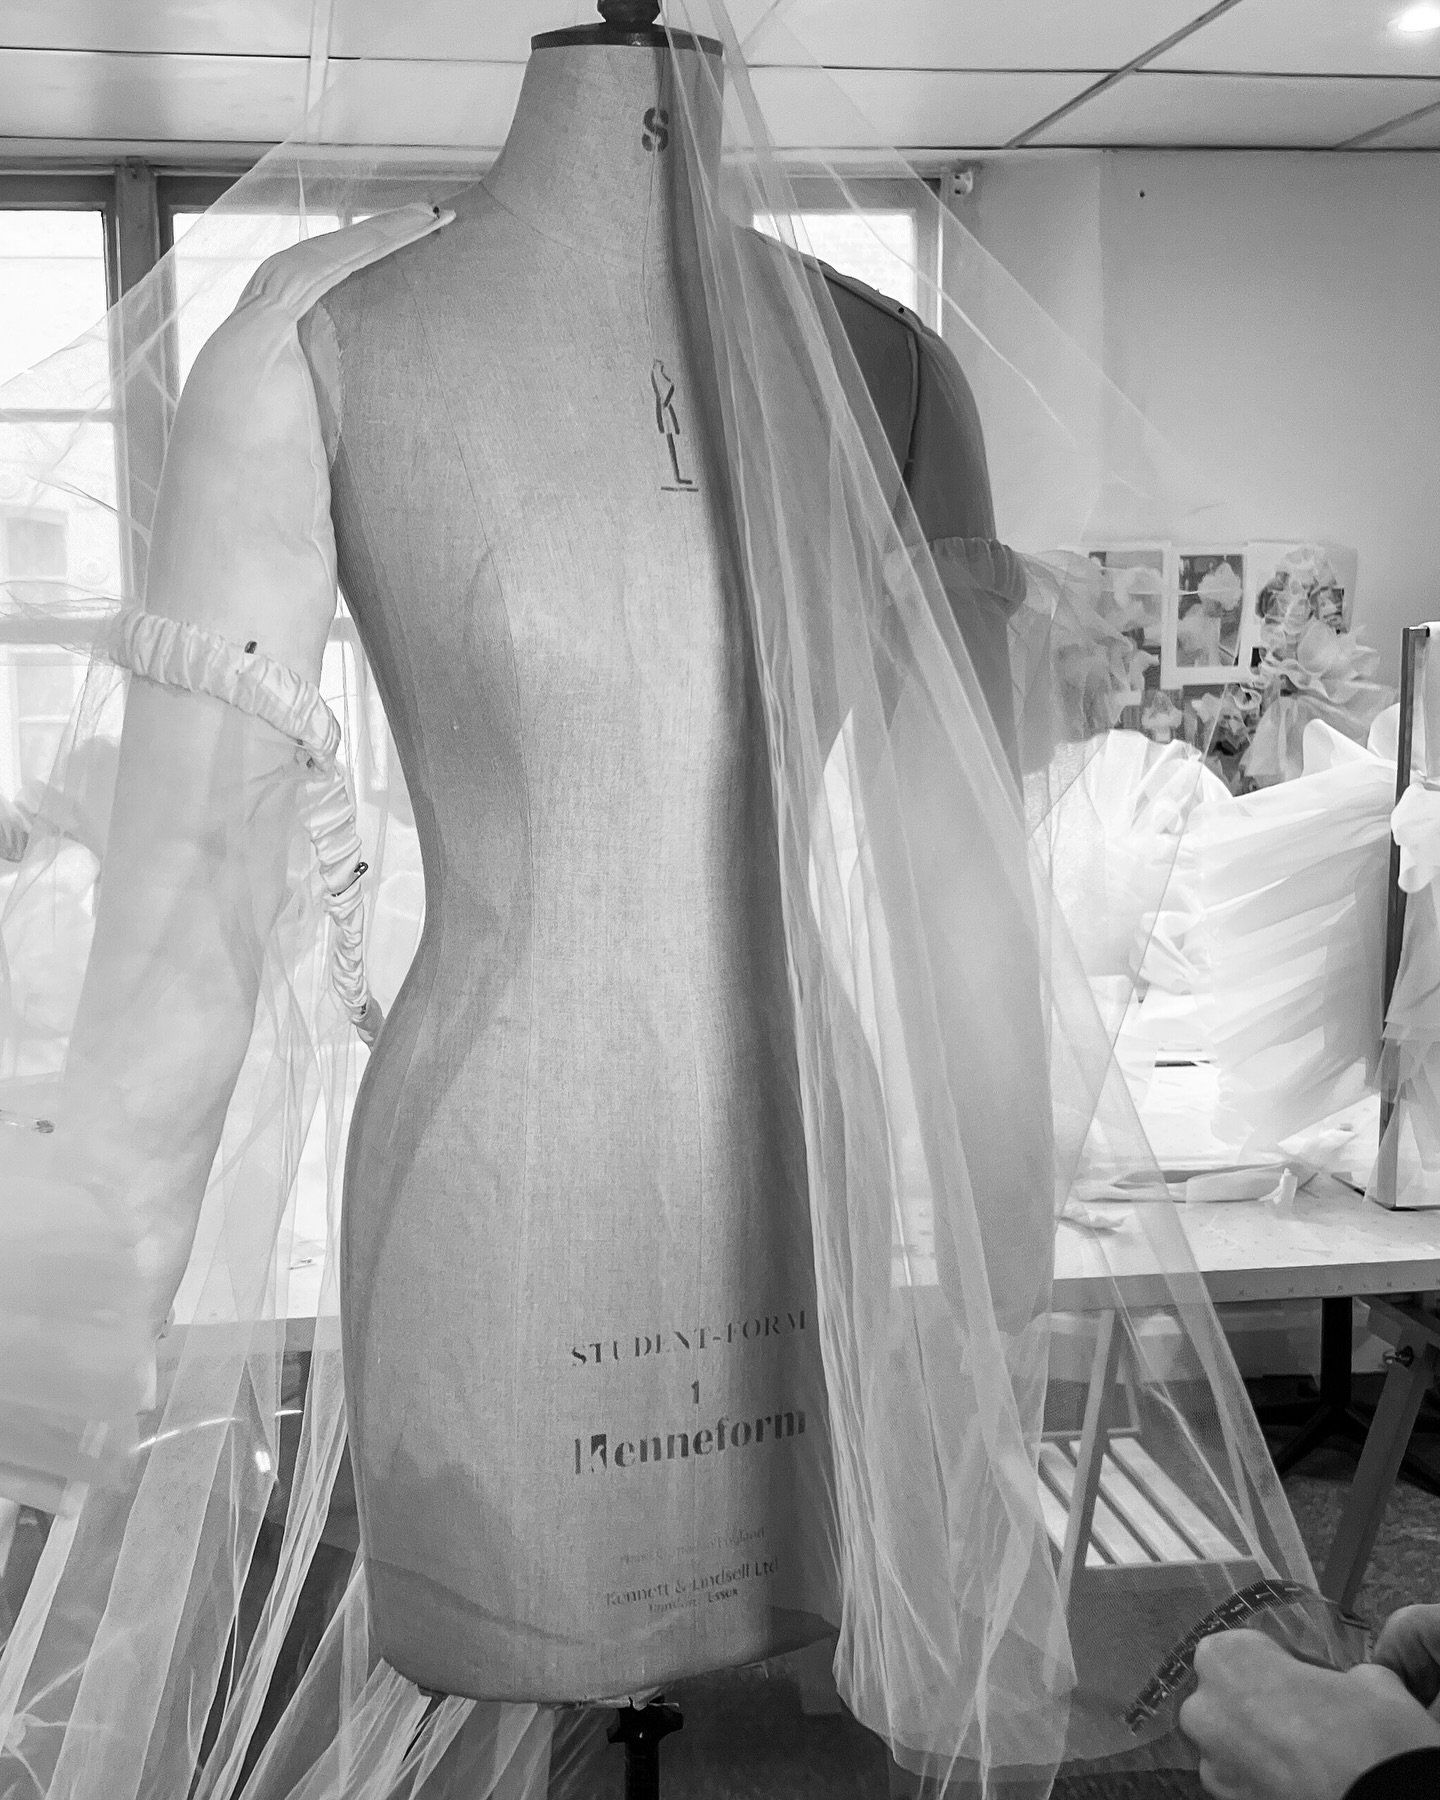 Behind the scenes in our atelier creating the Periwinkle veil. Brides can choose to wear this piece over the face, or in a double drape at the back.

Find your nearest place to try via the link in our bio.

#HPLBalanceChapterOne #HalfpennyLondon #HPL